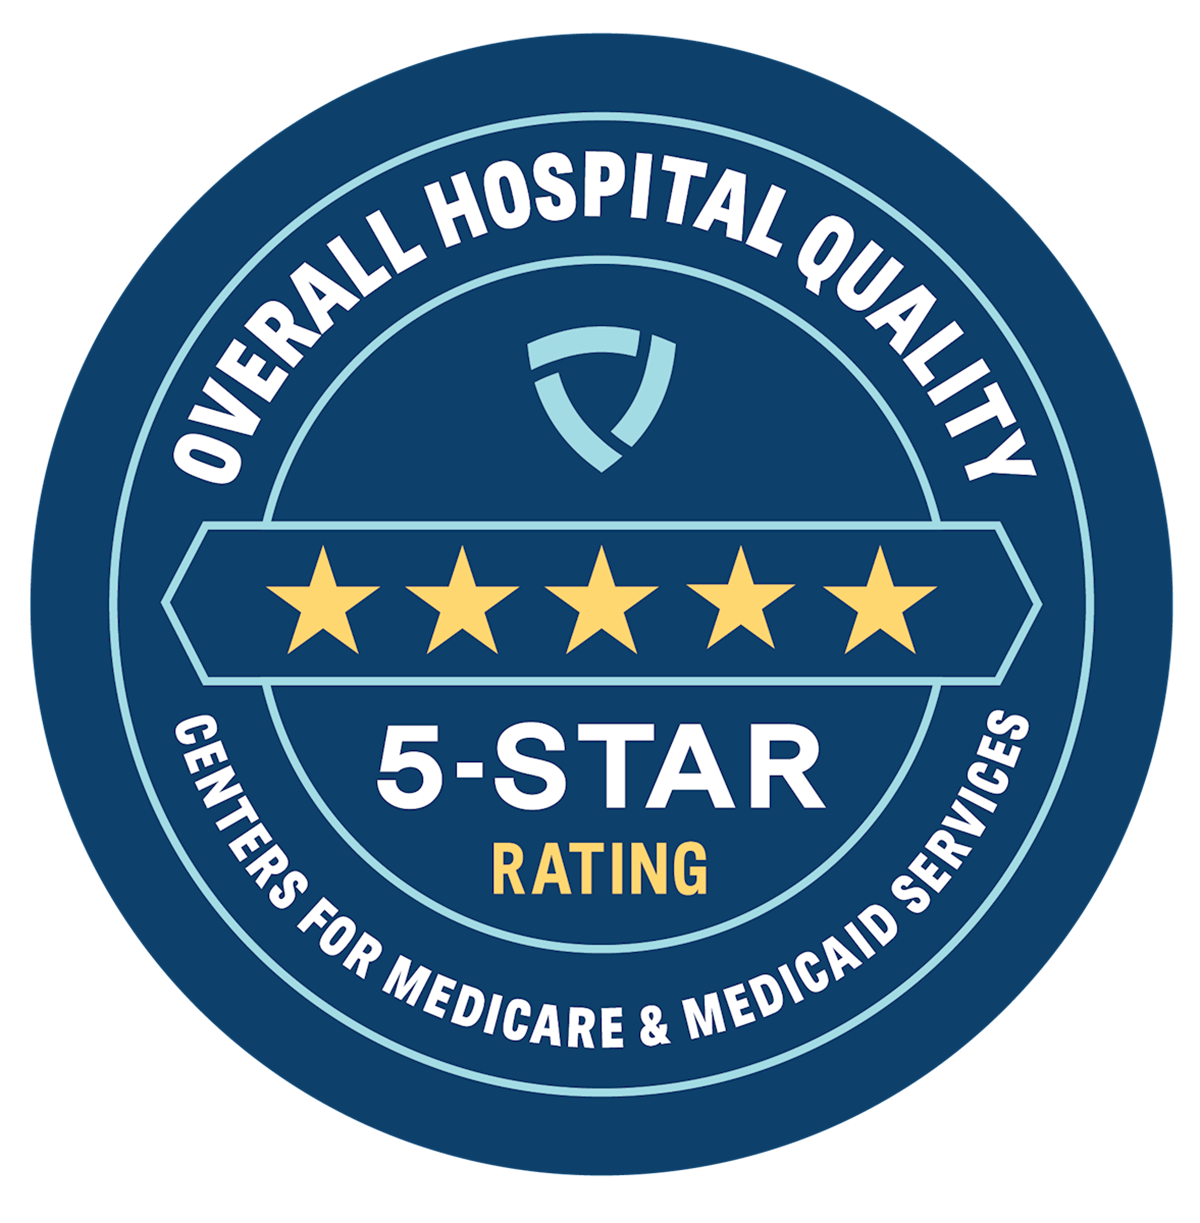 South County Hospital Receives 5-Star Rating from CMS